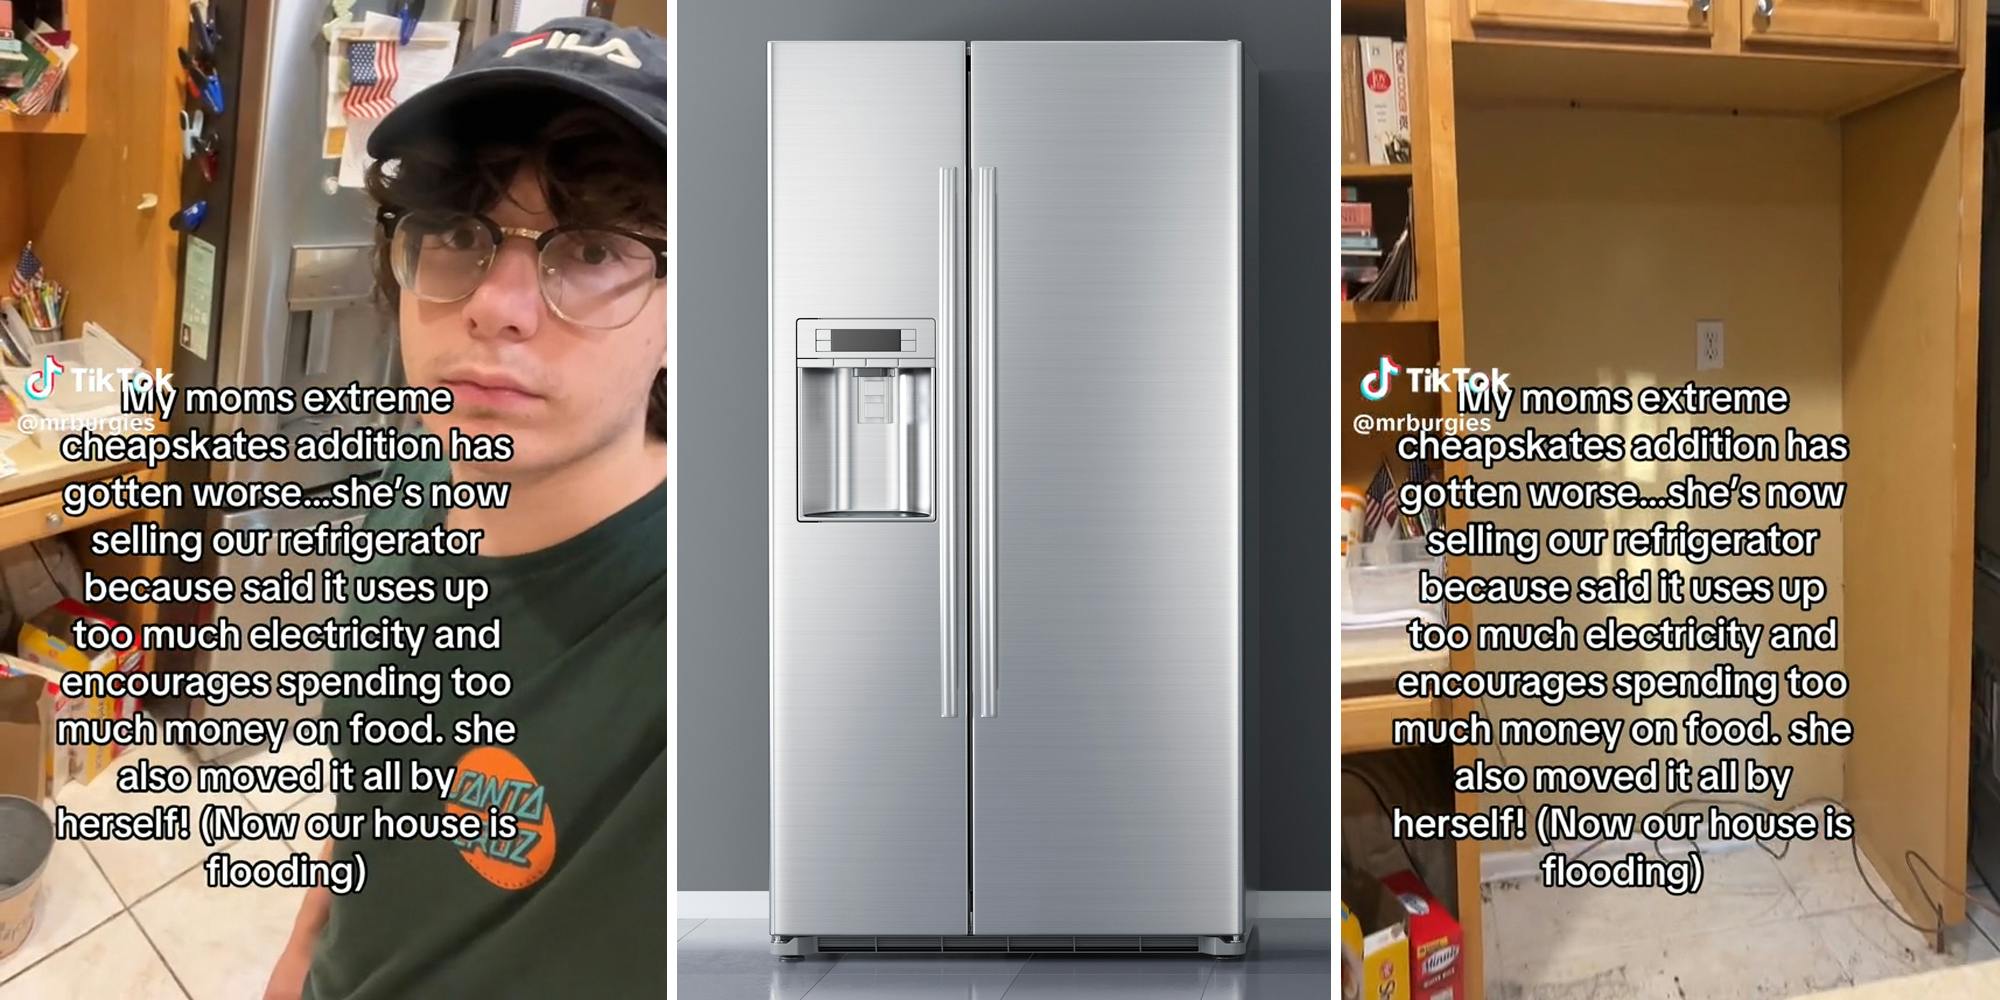 young man in kitchen (l) refrigerator (c) missing refrigerator (r) caption "My moms extremem cheapskates addition has gotten worse...she's now selling our refrigerator because said it uses up too much electricity and ecourages spending too much money on food. she also moved it all by herself! (Now our house is flooding)"